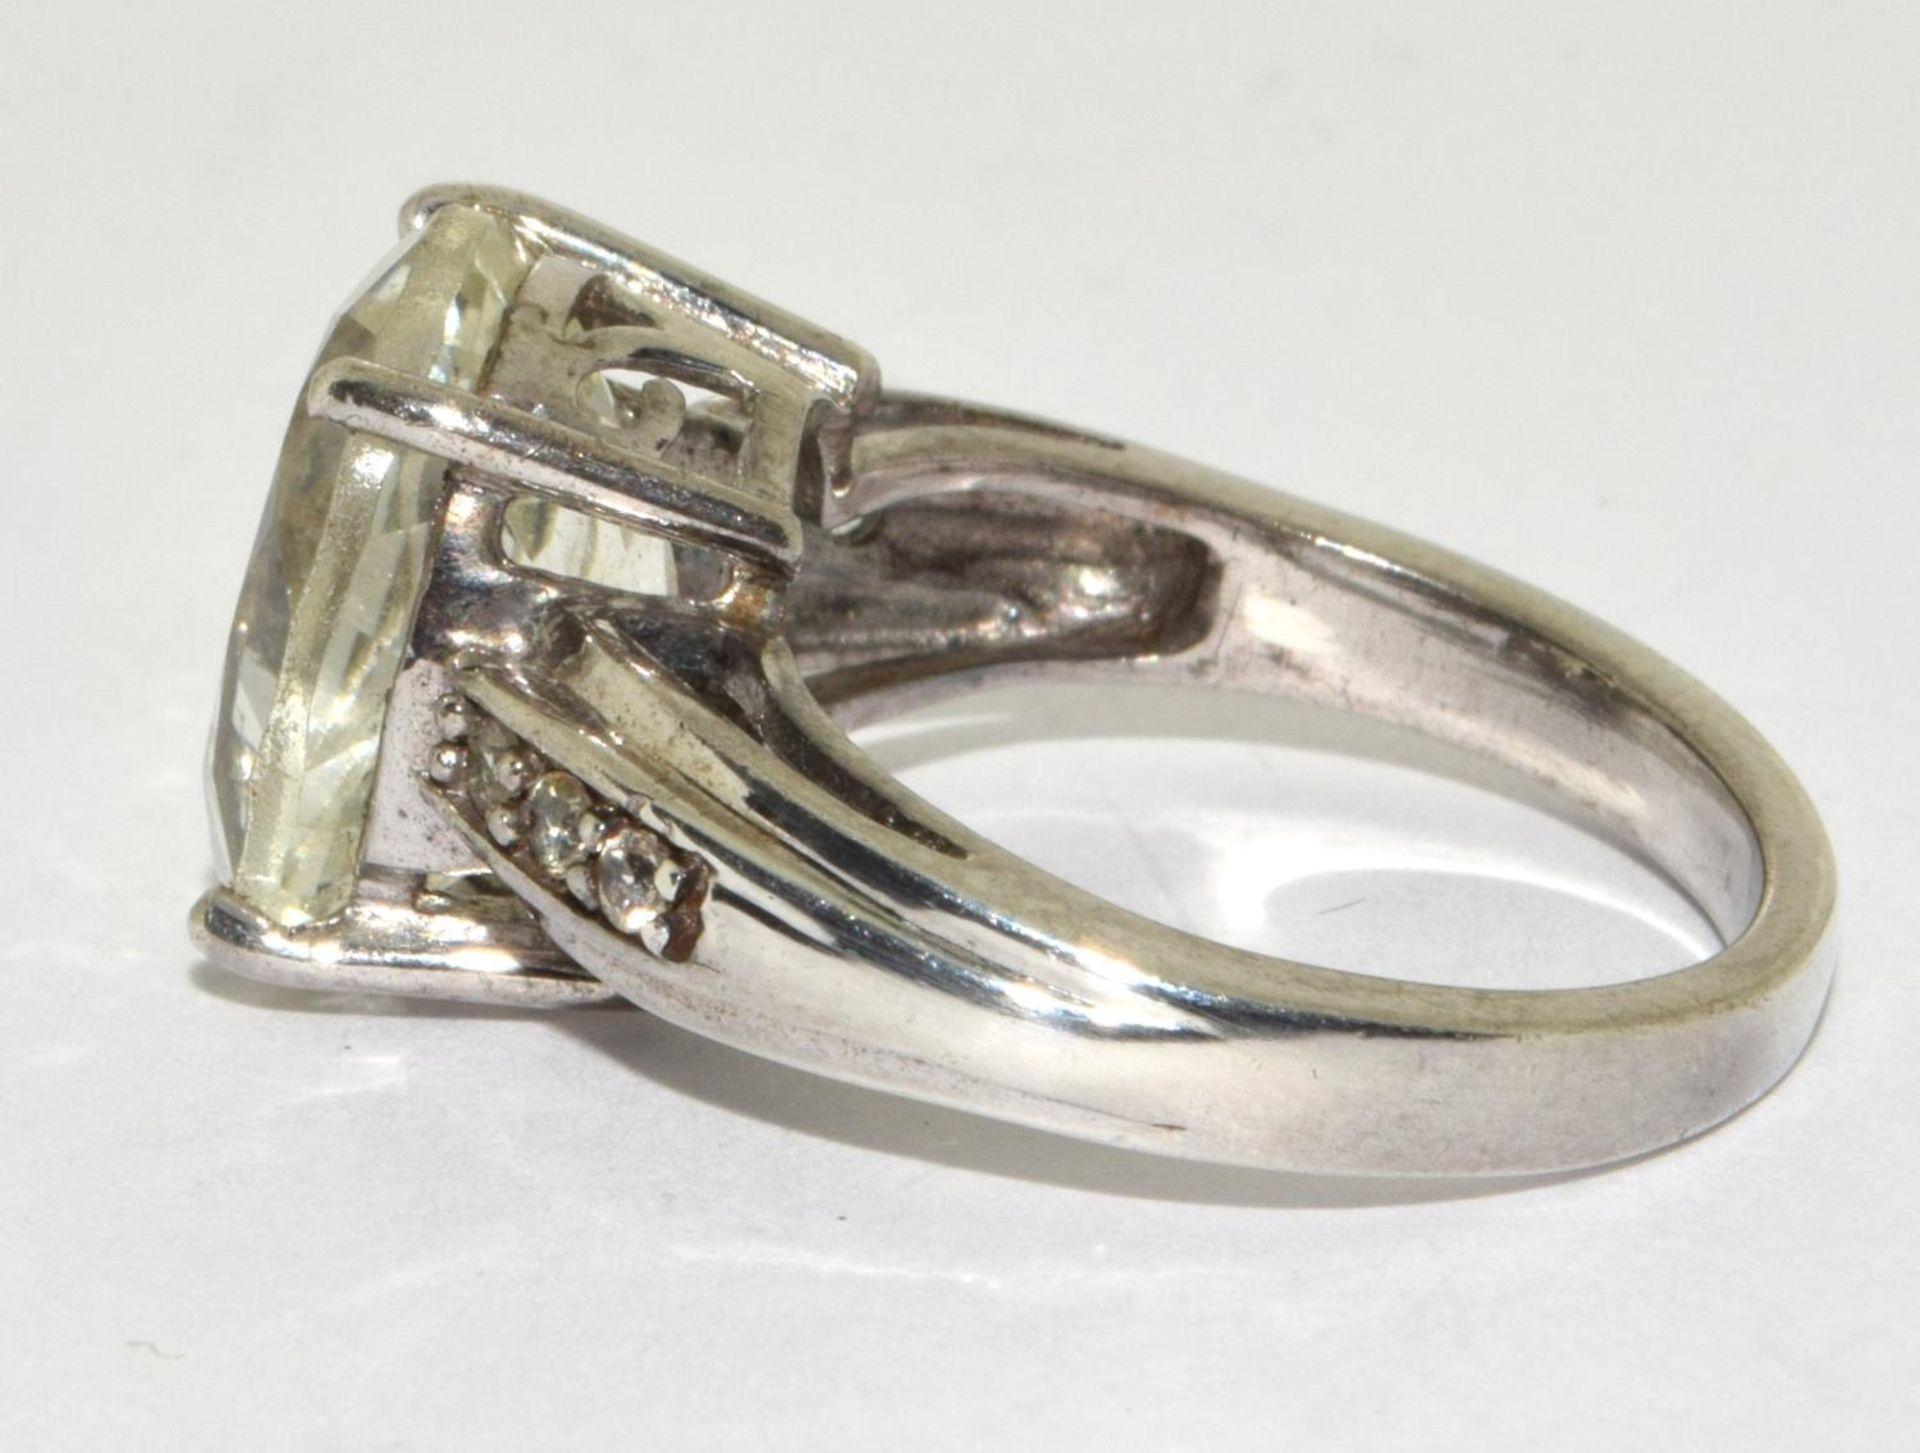 Green amethyst W/G on silver ring size L - Image 2 of 3